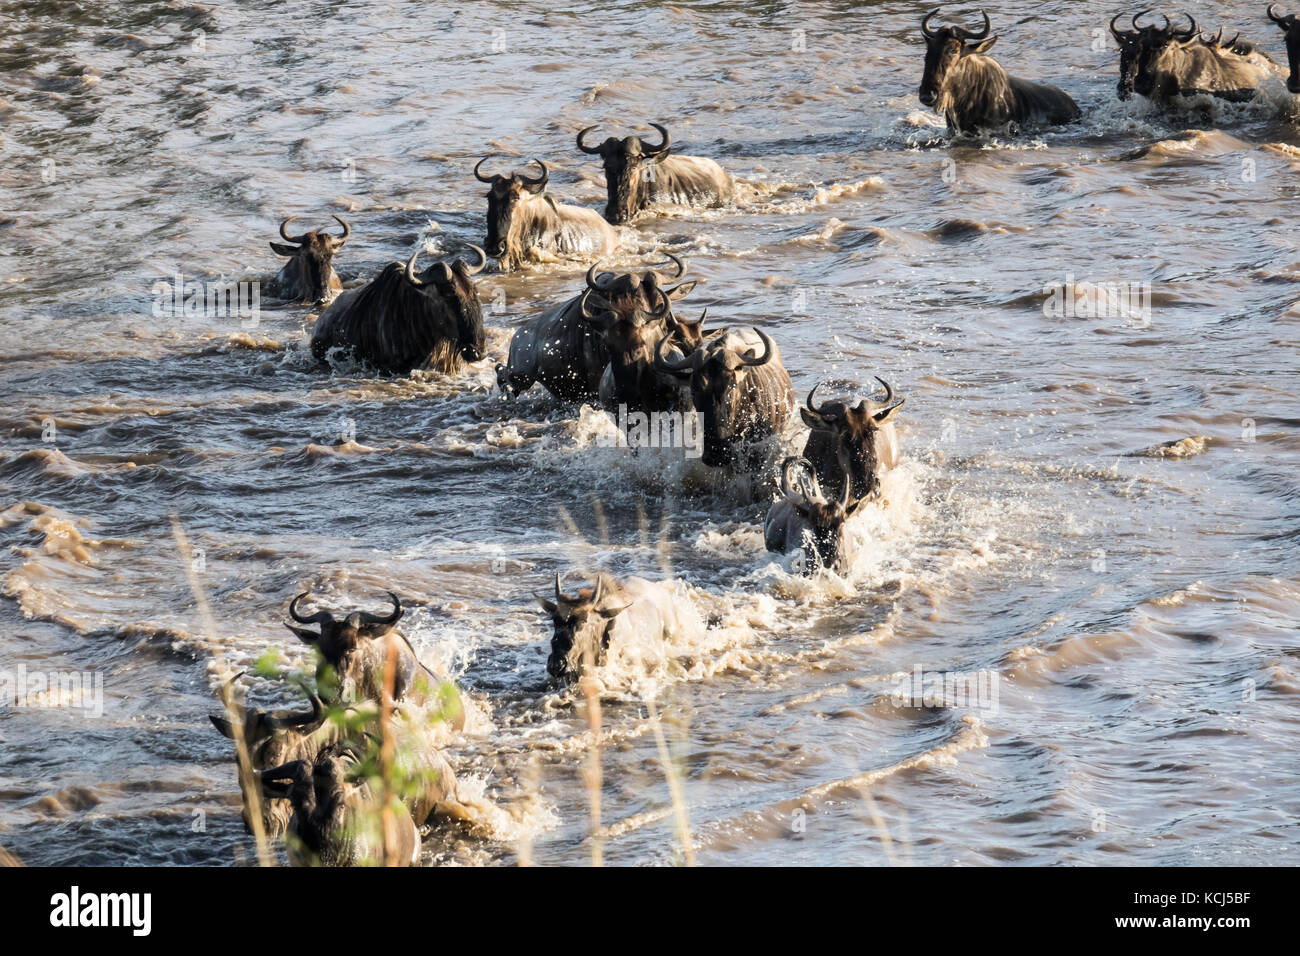 Wildebeest traversing the river during the Great Migration, facing the threat of crocodiles and currents that pull at the young Stock Photo